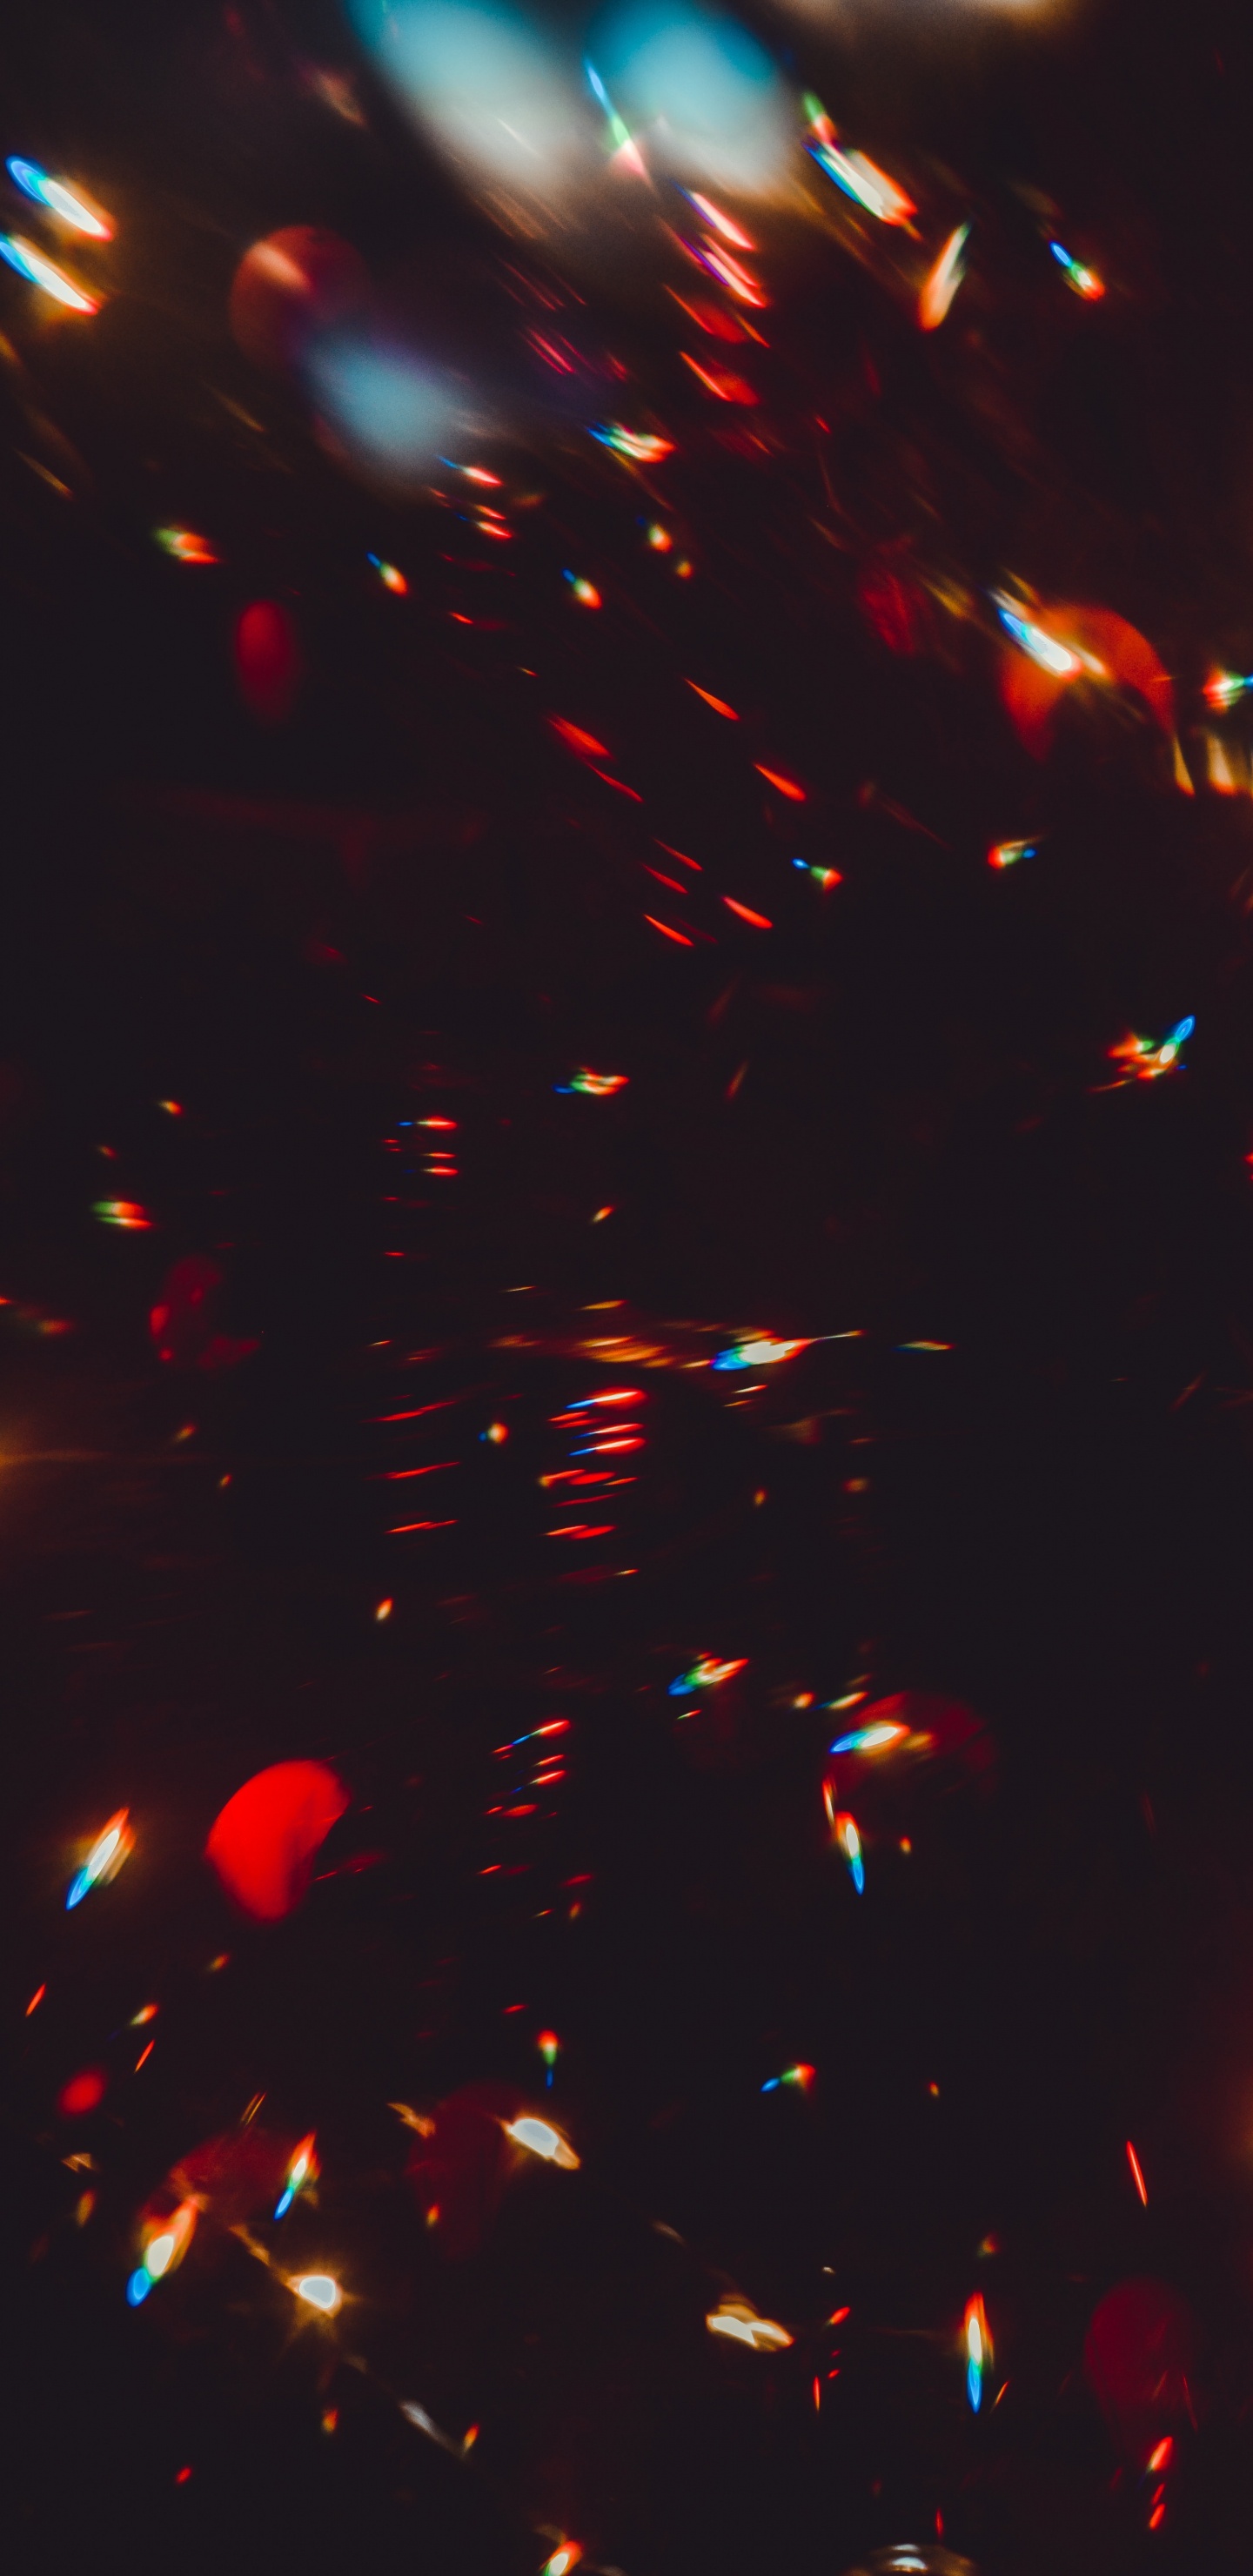 Red and Yellow Fireworks Display During Nighttime. Wallpaper in 1440x2960 Resolution